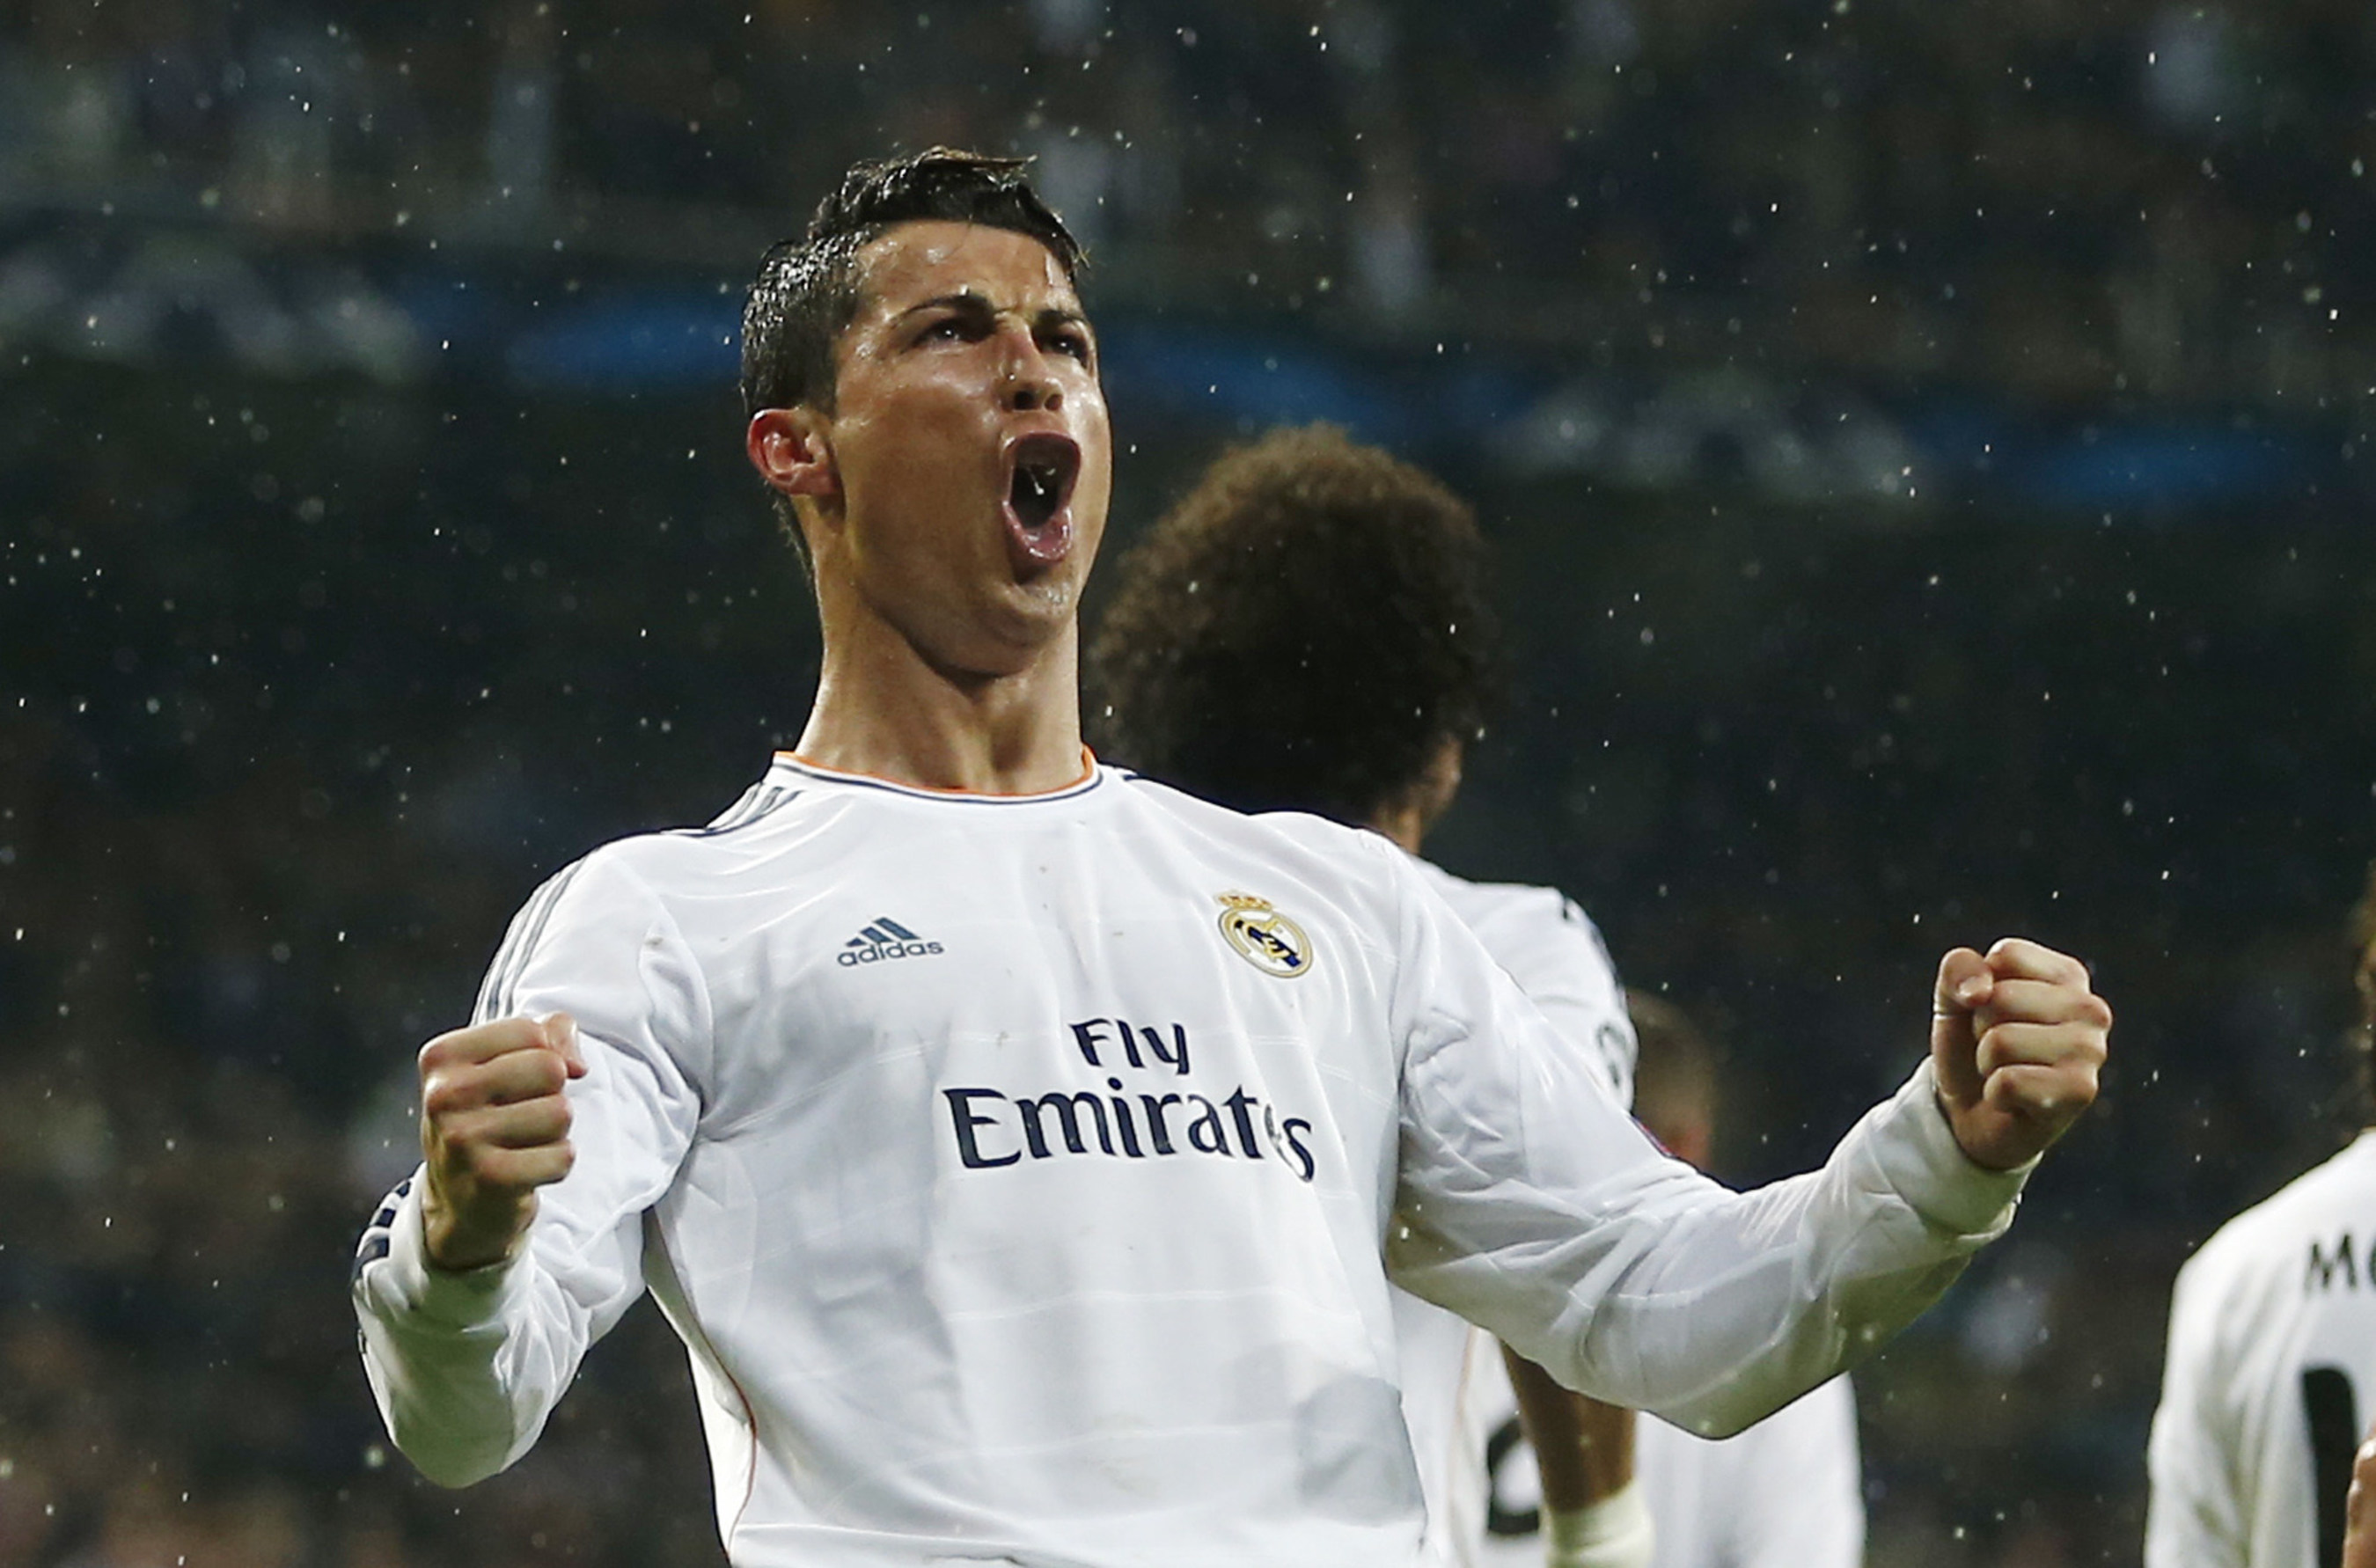 CRISTIANO RONALDO TO JOIN REAL MADRID FOR THE 2014 GUINNESS INTERNATIONAL CHAMPIONS CUP (PRNewsFoto/Relevent Sports)